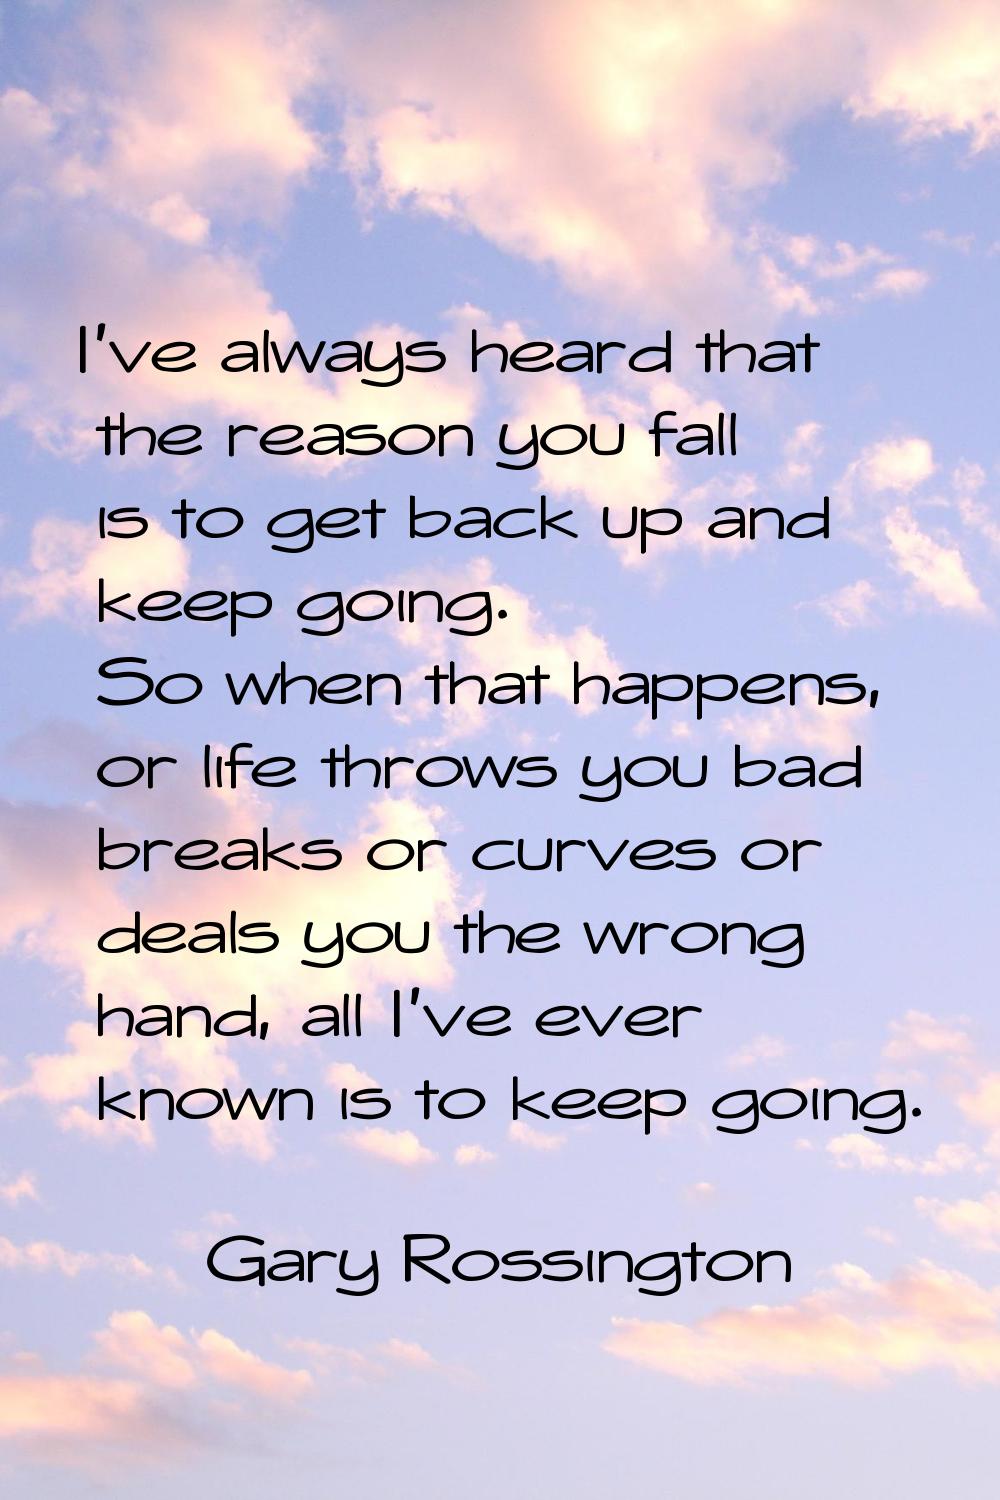 I've always heard that the reason you fall is to get back up and keep going. So when that happens, 